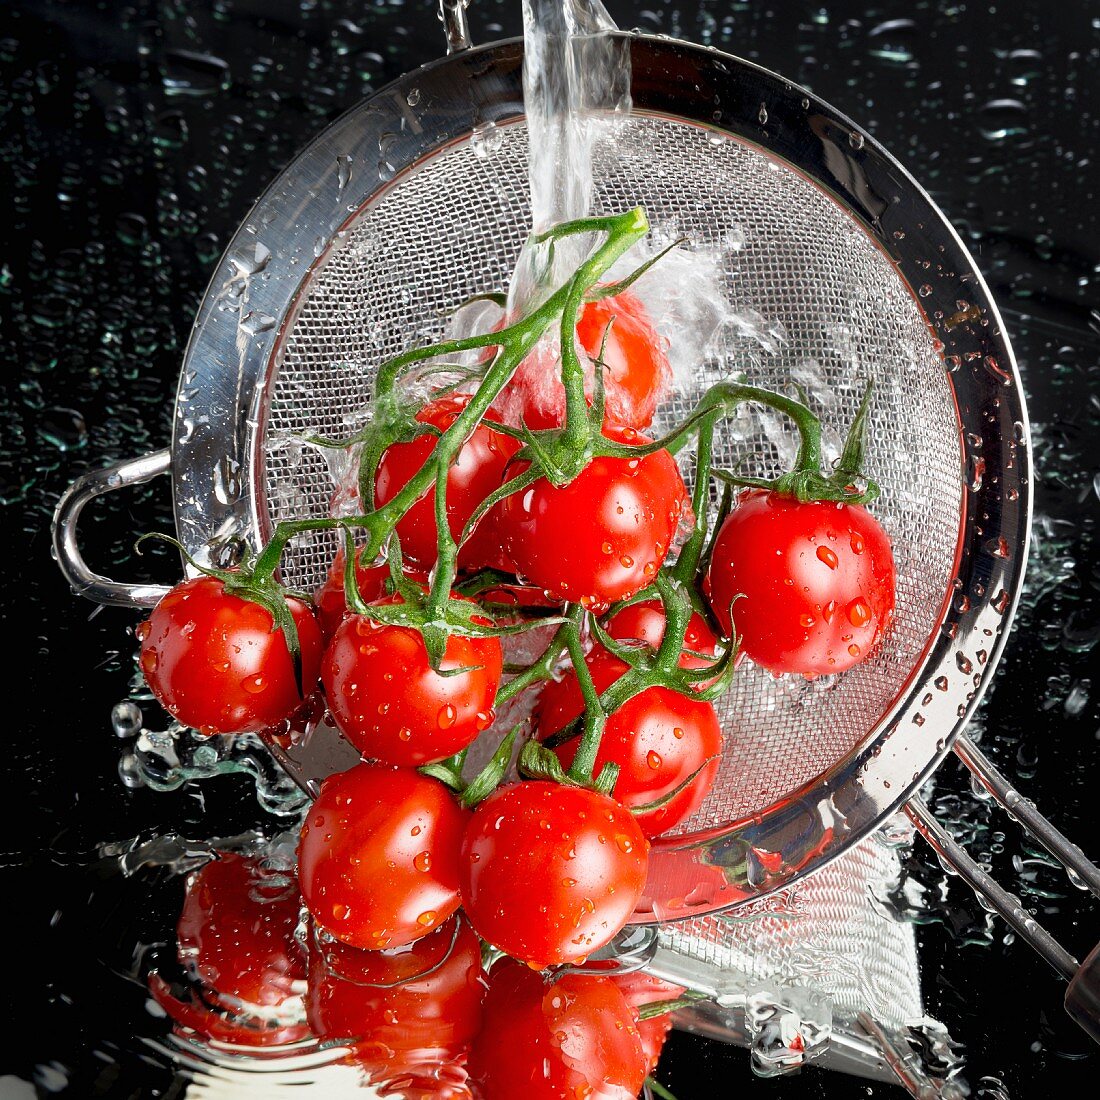 Tomatoes being washed in a sieve